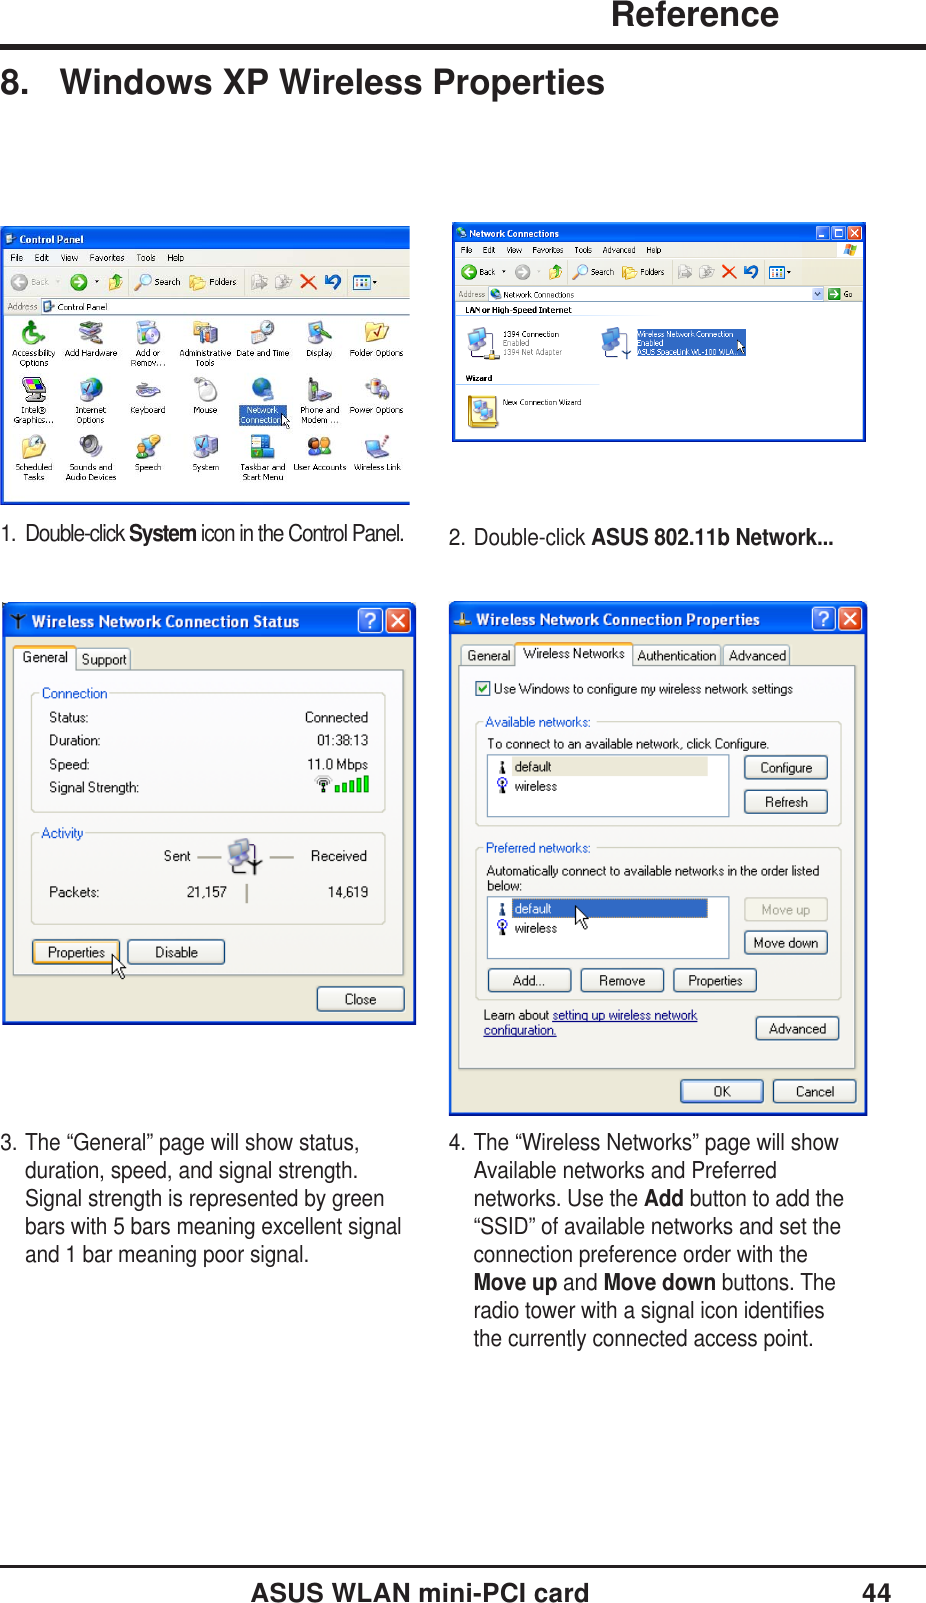 ASUS WLAN mini-PCI card 44               ReferenceChapter 38. Windows XP Wireless Properties2. Double-click ASUS 802.11b Network...1. Double-click System icon in the Control Panel.3. The “General” page will show status,duration, speed, and signal strength.Signal strength is represented by greenbars with 5 bars meaning excellent signaland 1 bar meaning poor signal.4. The “Wireless Networks” page will showAvailable networks and Preferrednetworks. Use the Add button to add the“SSID” of available networks and set theconnection preference order with theMove up and Move down buttons. Theradio tower with a signal icon identifiesthe currently connected access point.